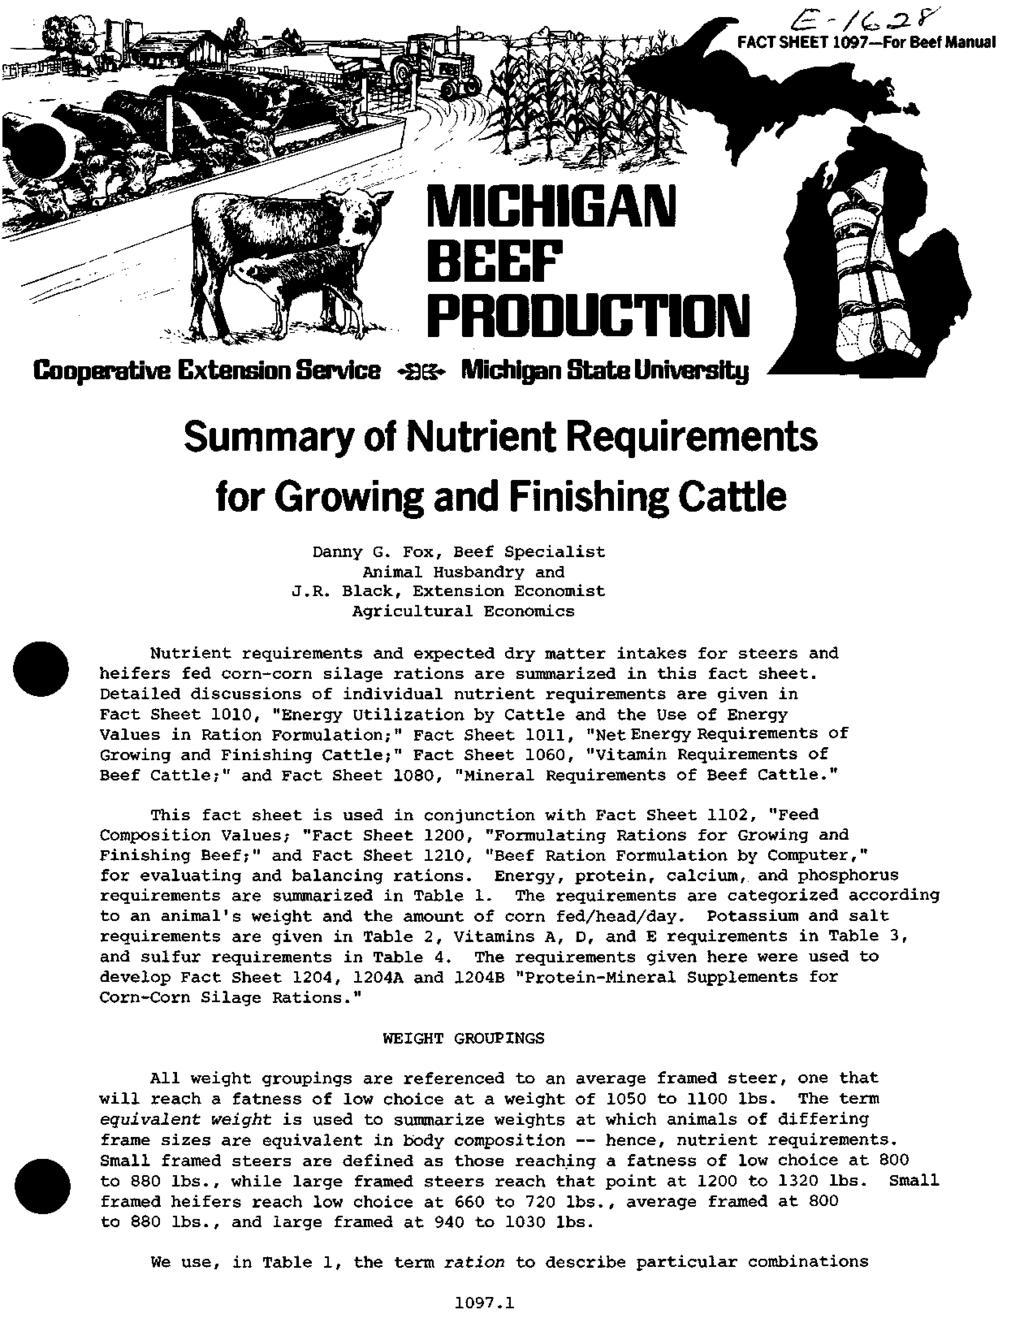 FACT SHEET 197-For Beef Manual MICHIGAN BEEP PRODUCTION Cooperative Extension Service «3E3* Michigan State University Summary of Nutrient Requirements for Growing and Finishing Cattle Danny G.